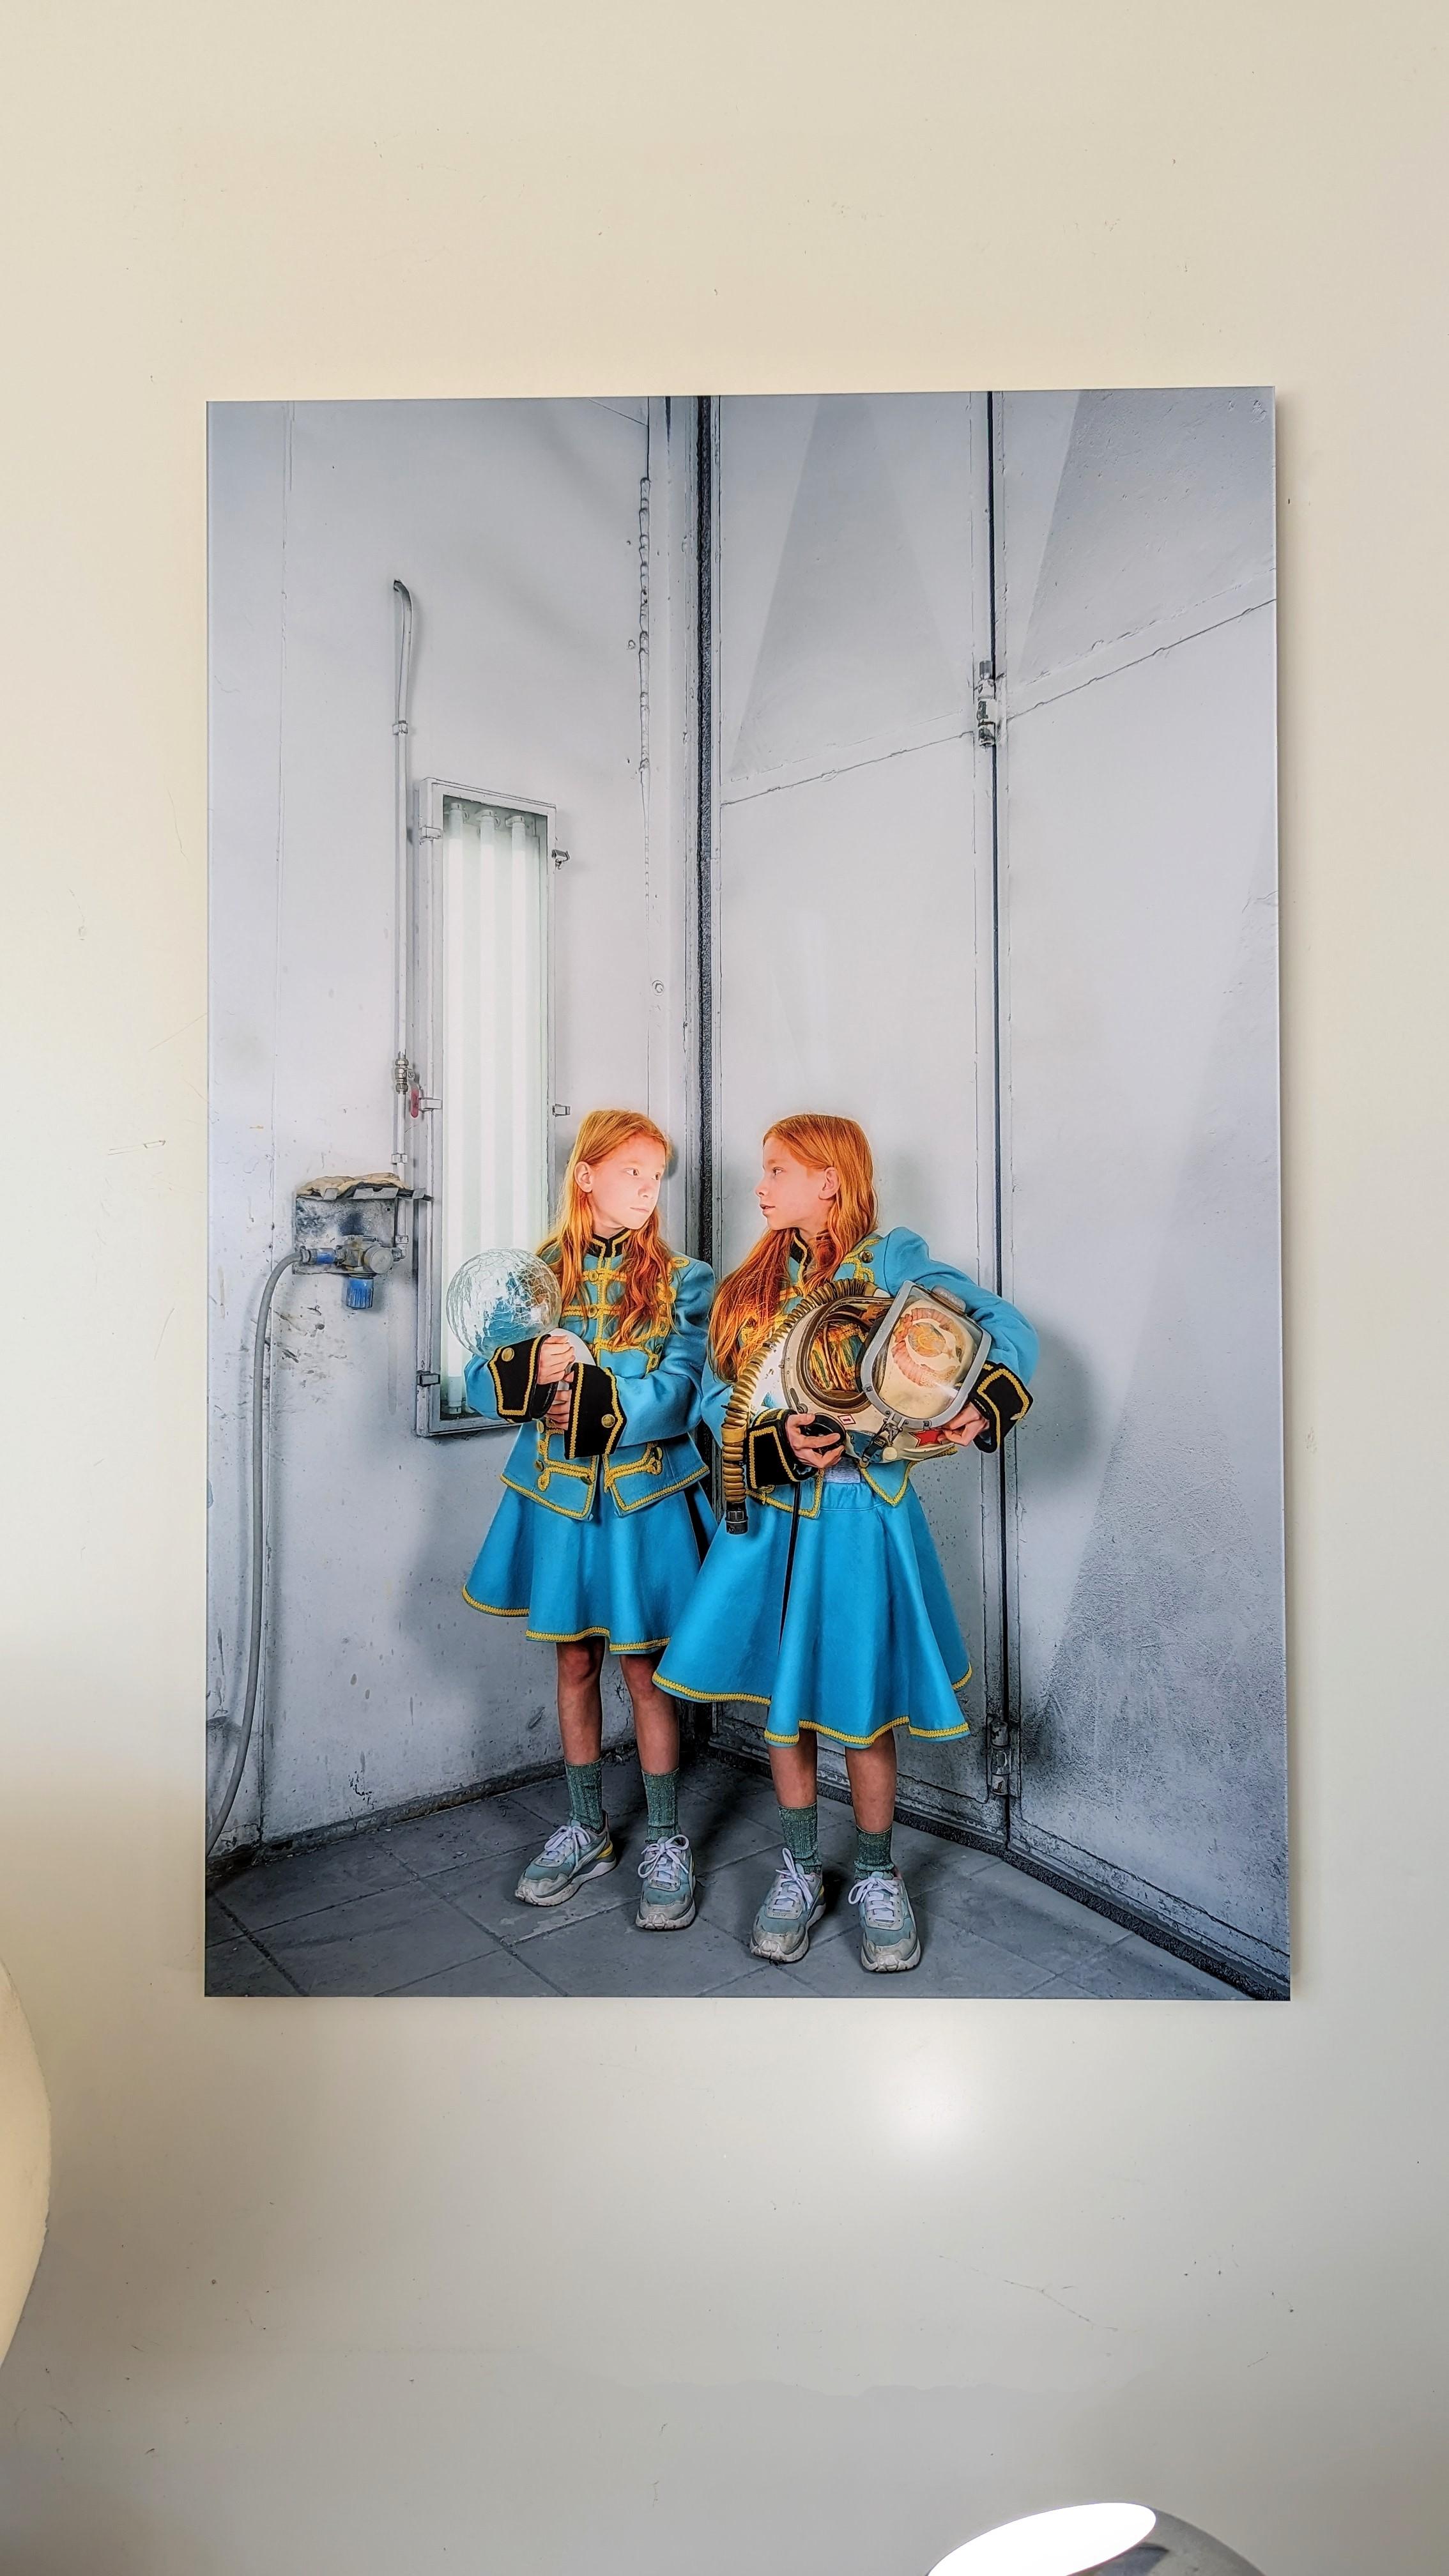 Title: 'Page of the Mirrored' (2021)

The world is facing huge challenges that endanger the basic needs and lifelines of humanity. Human encounters have always been the start and

source of inspiration in my work. Meeting the Dutch twin- sisters I